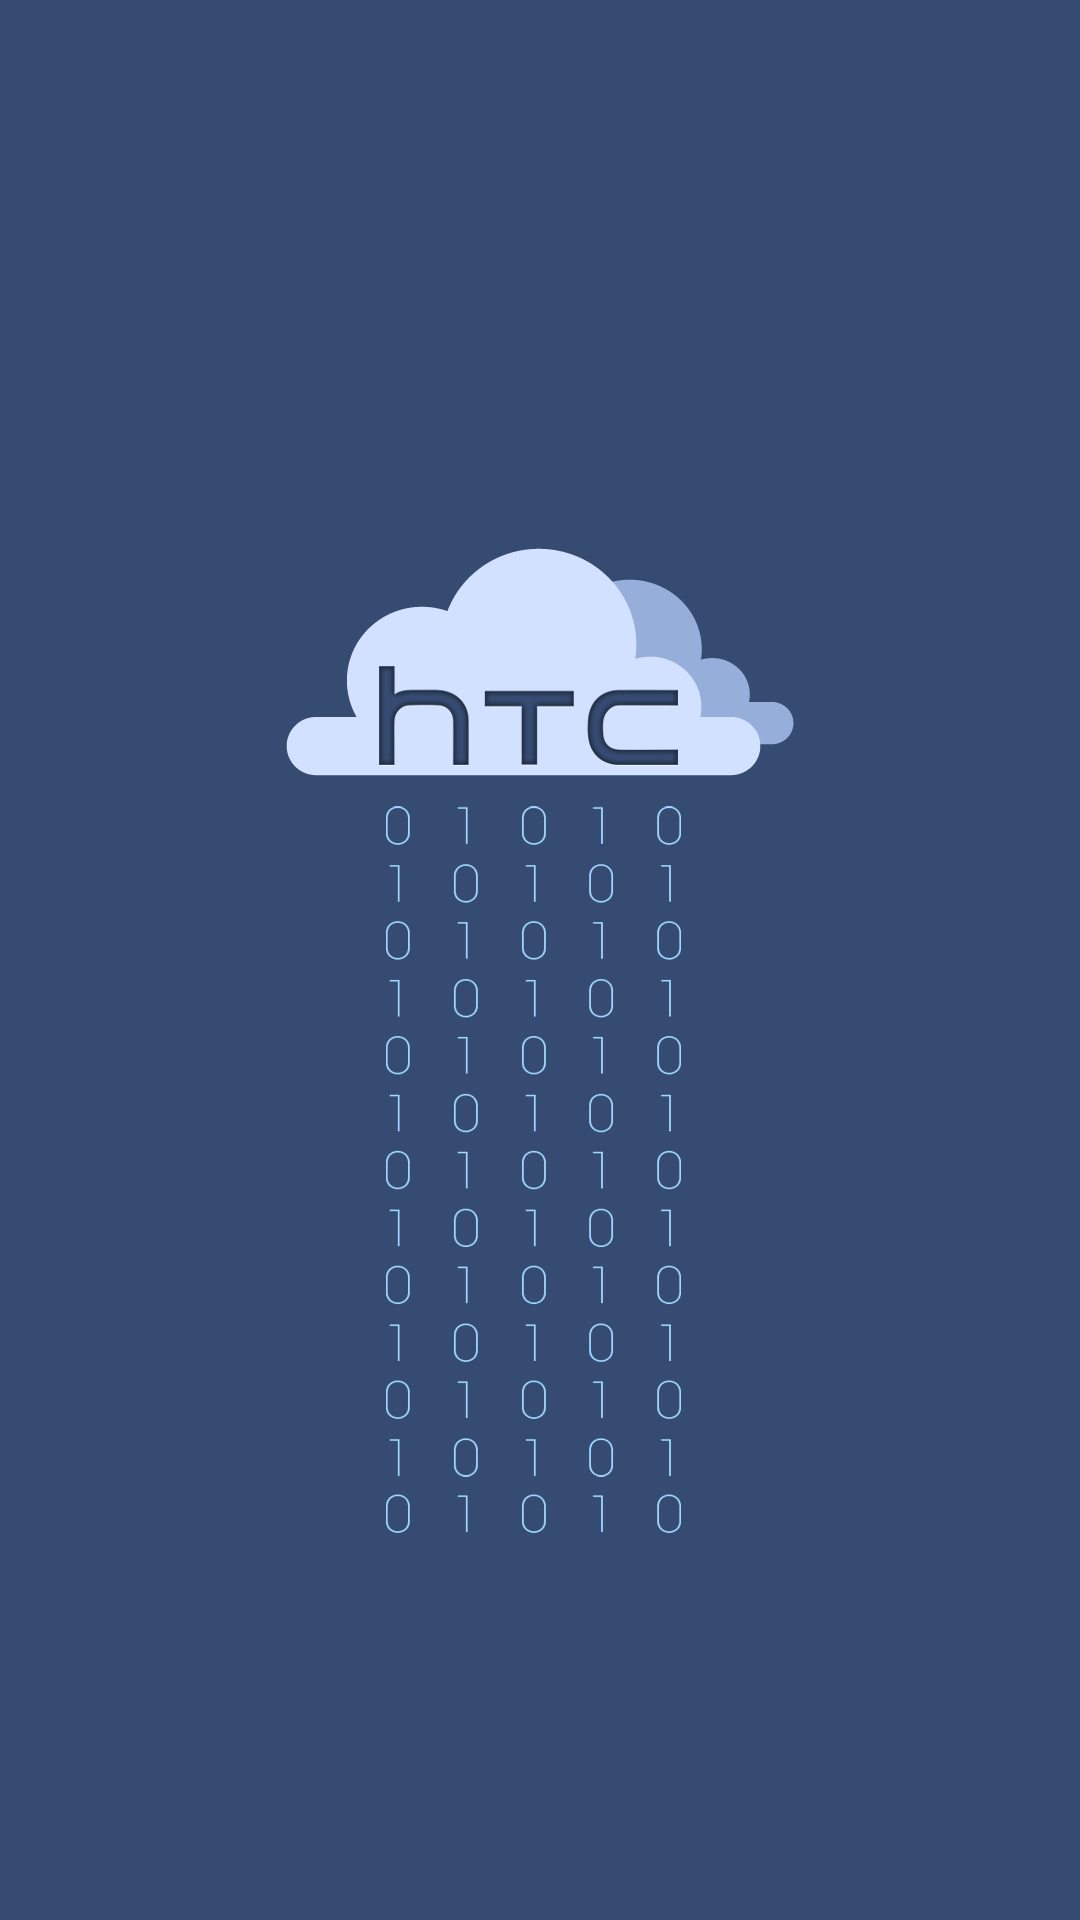 Htc one wallpapers hd